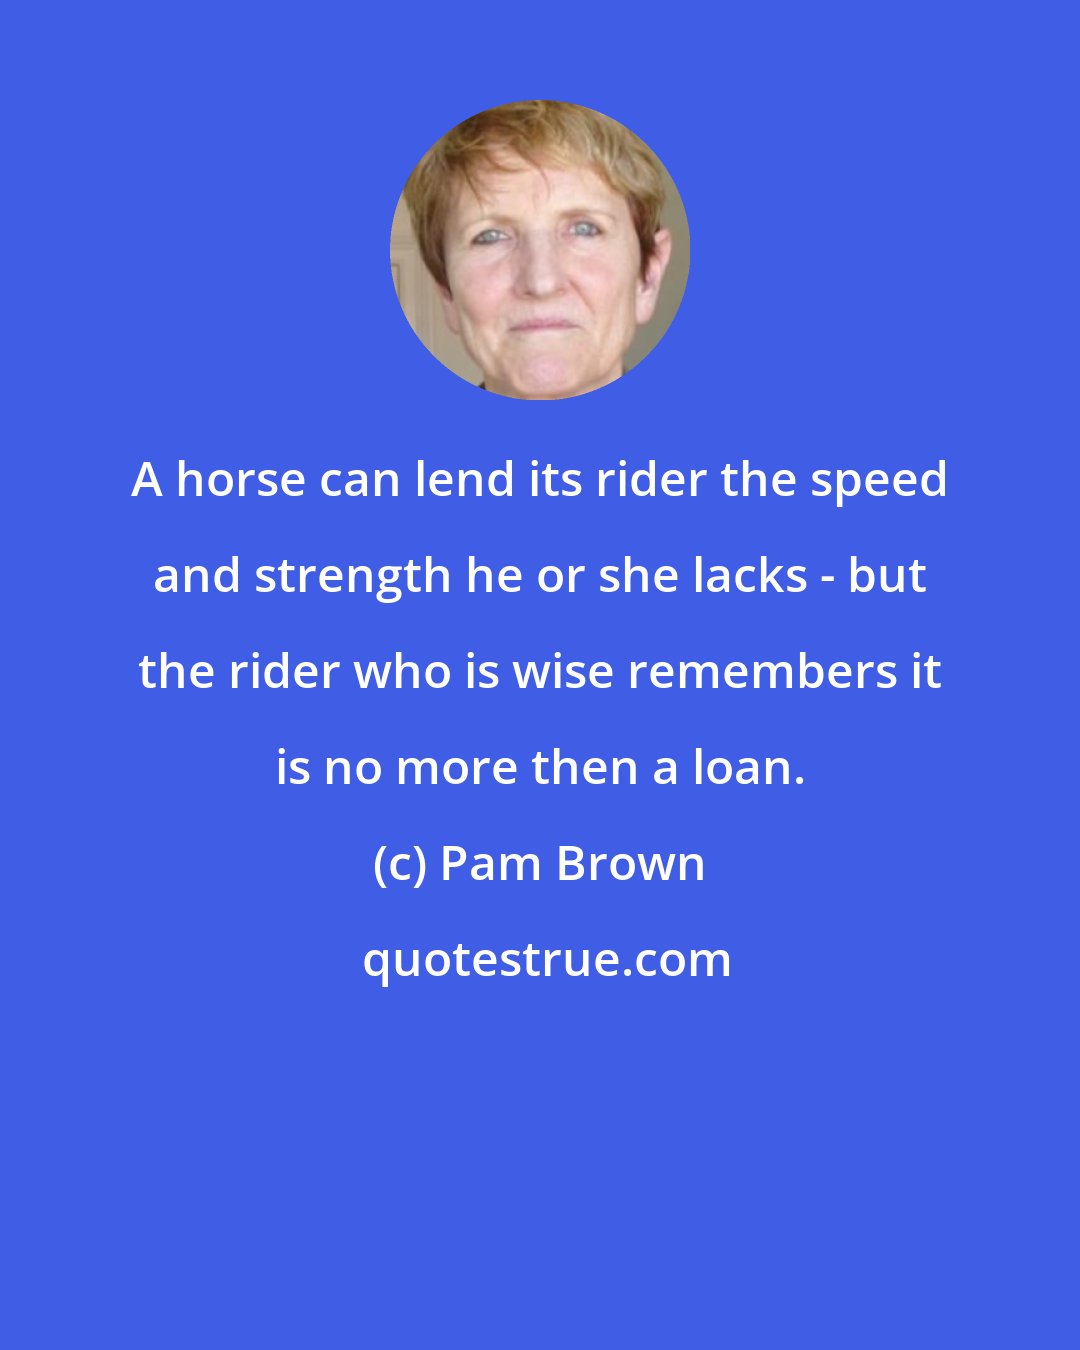 Pam Brown: A horse can lend its rider the speed and strength he or she lacks - but the rider who is wise remembers it is no more then a loan.